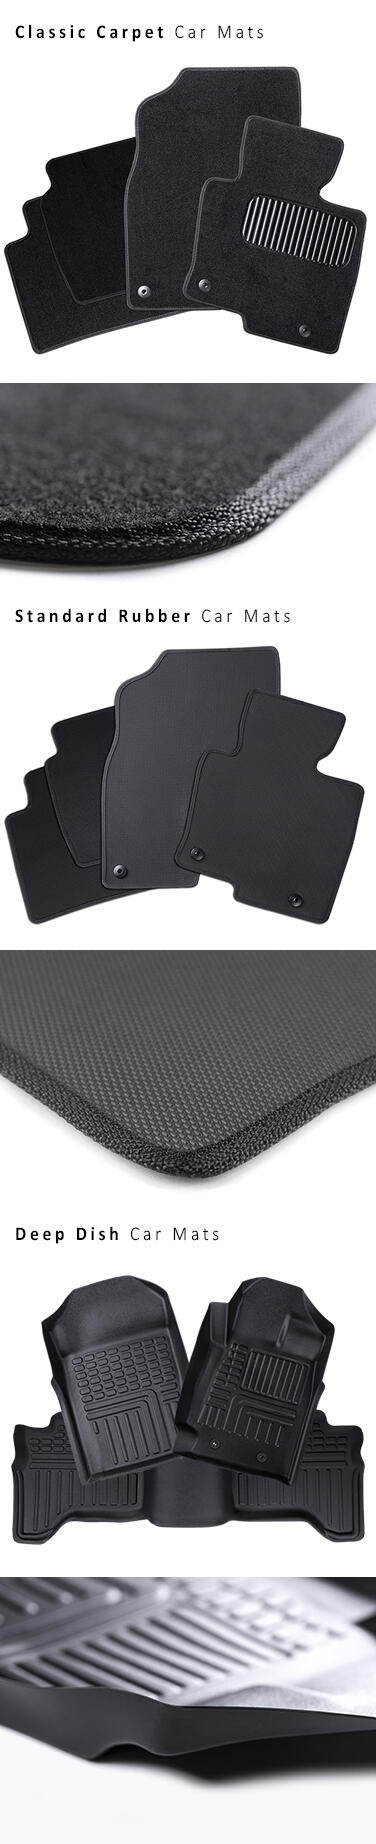 Tailored Vehicle Accessories - Car Mats, Seat Covers, Ute Accessories ...